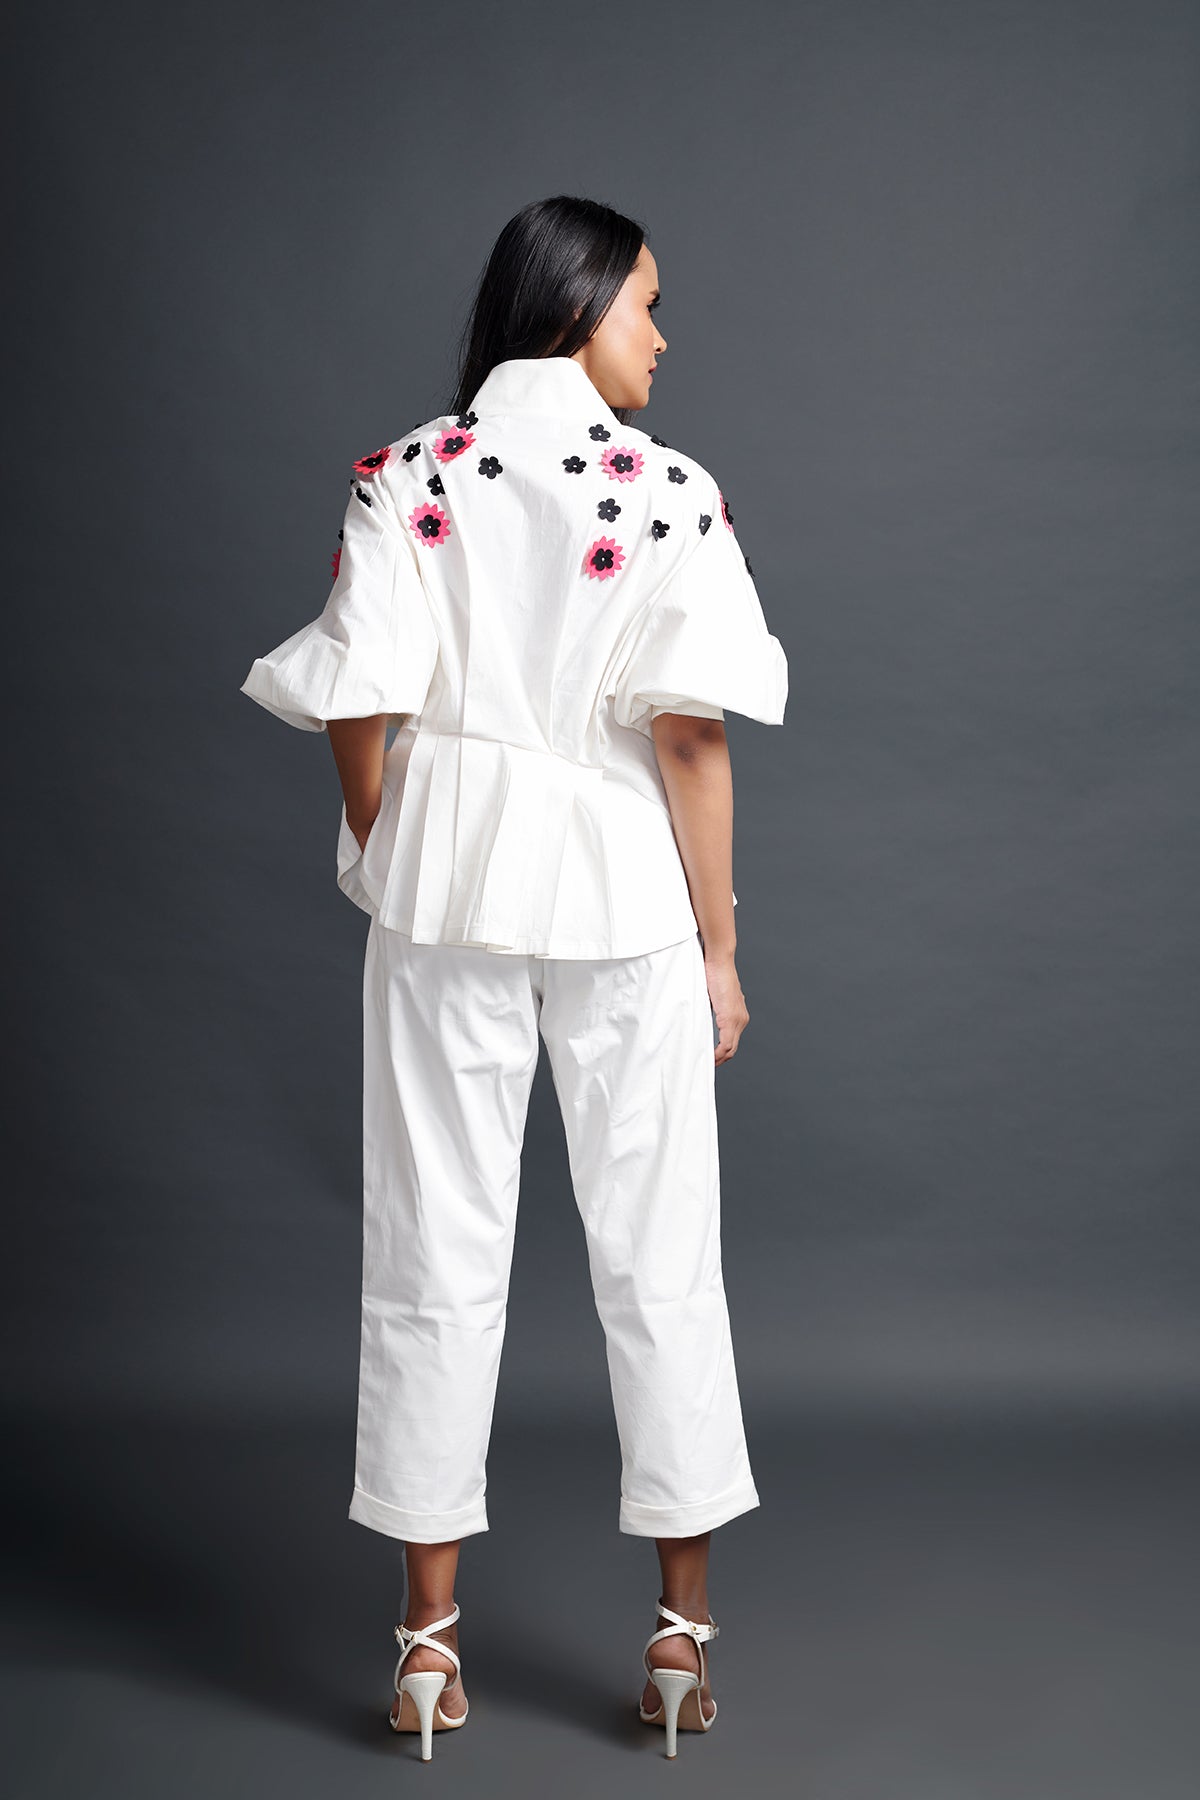 Image of WHITE SHIRT IN COTTON BASE WITH PLEATED CONFETTI DETAIL. IT IS PAIRED WITH MATCHING PANTS. From savoirfashions.com